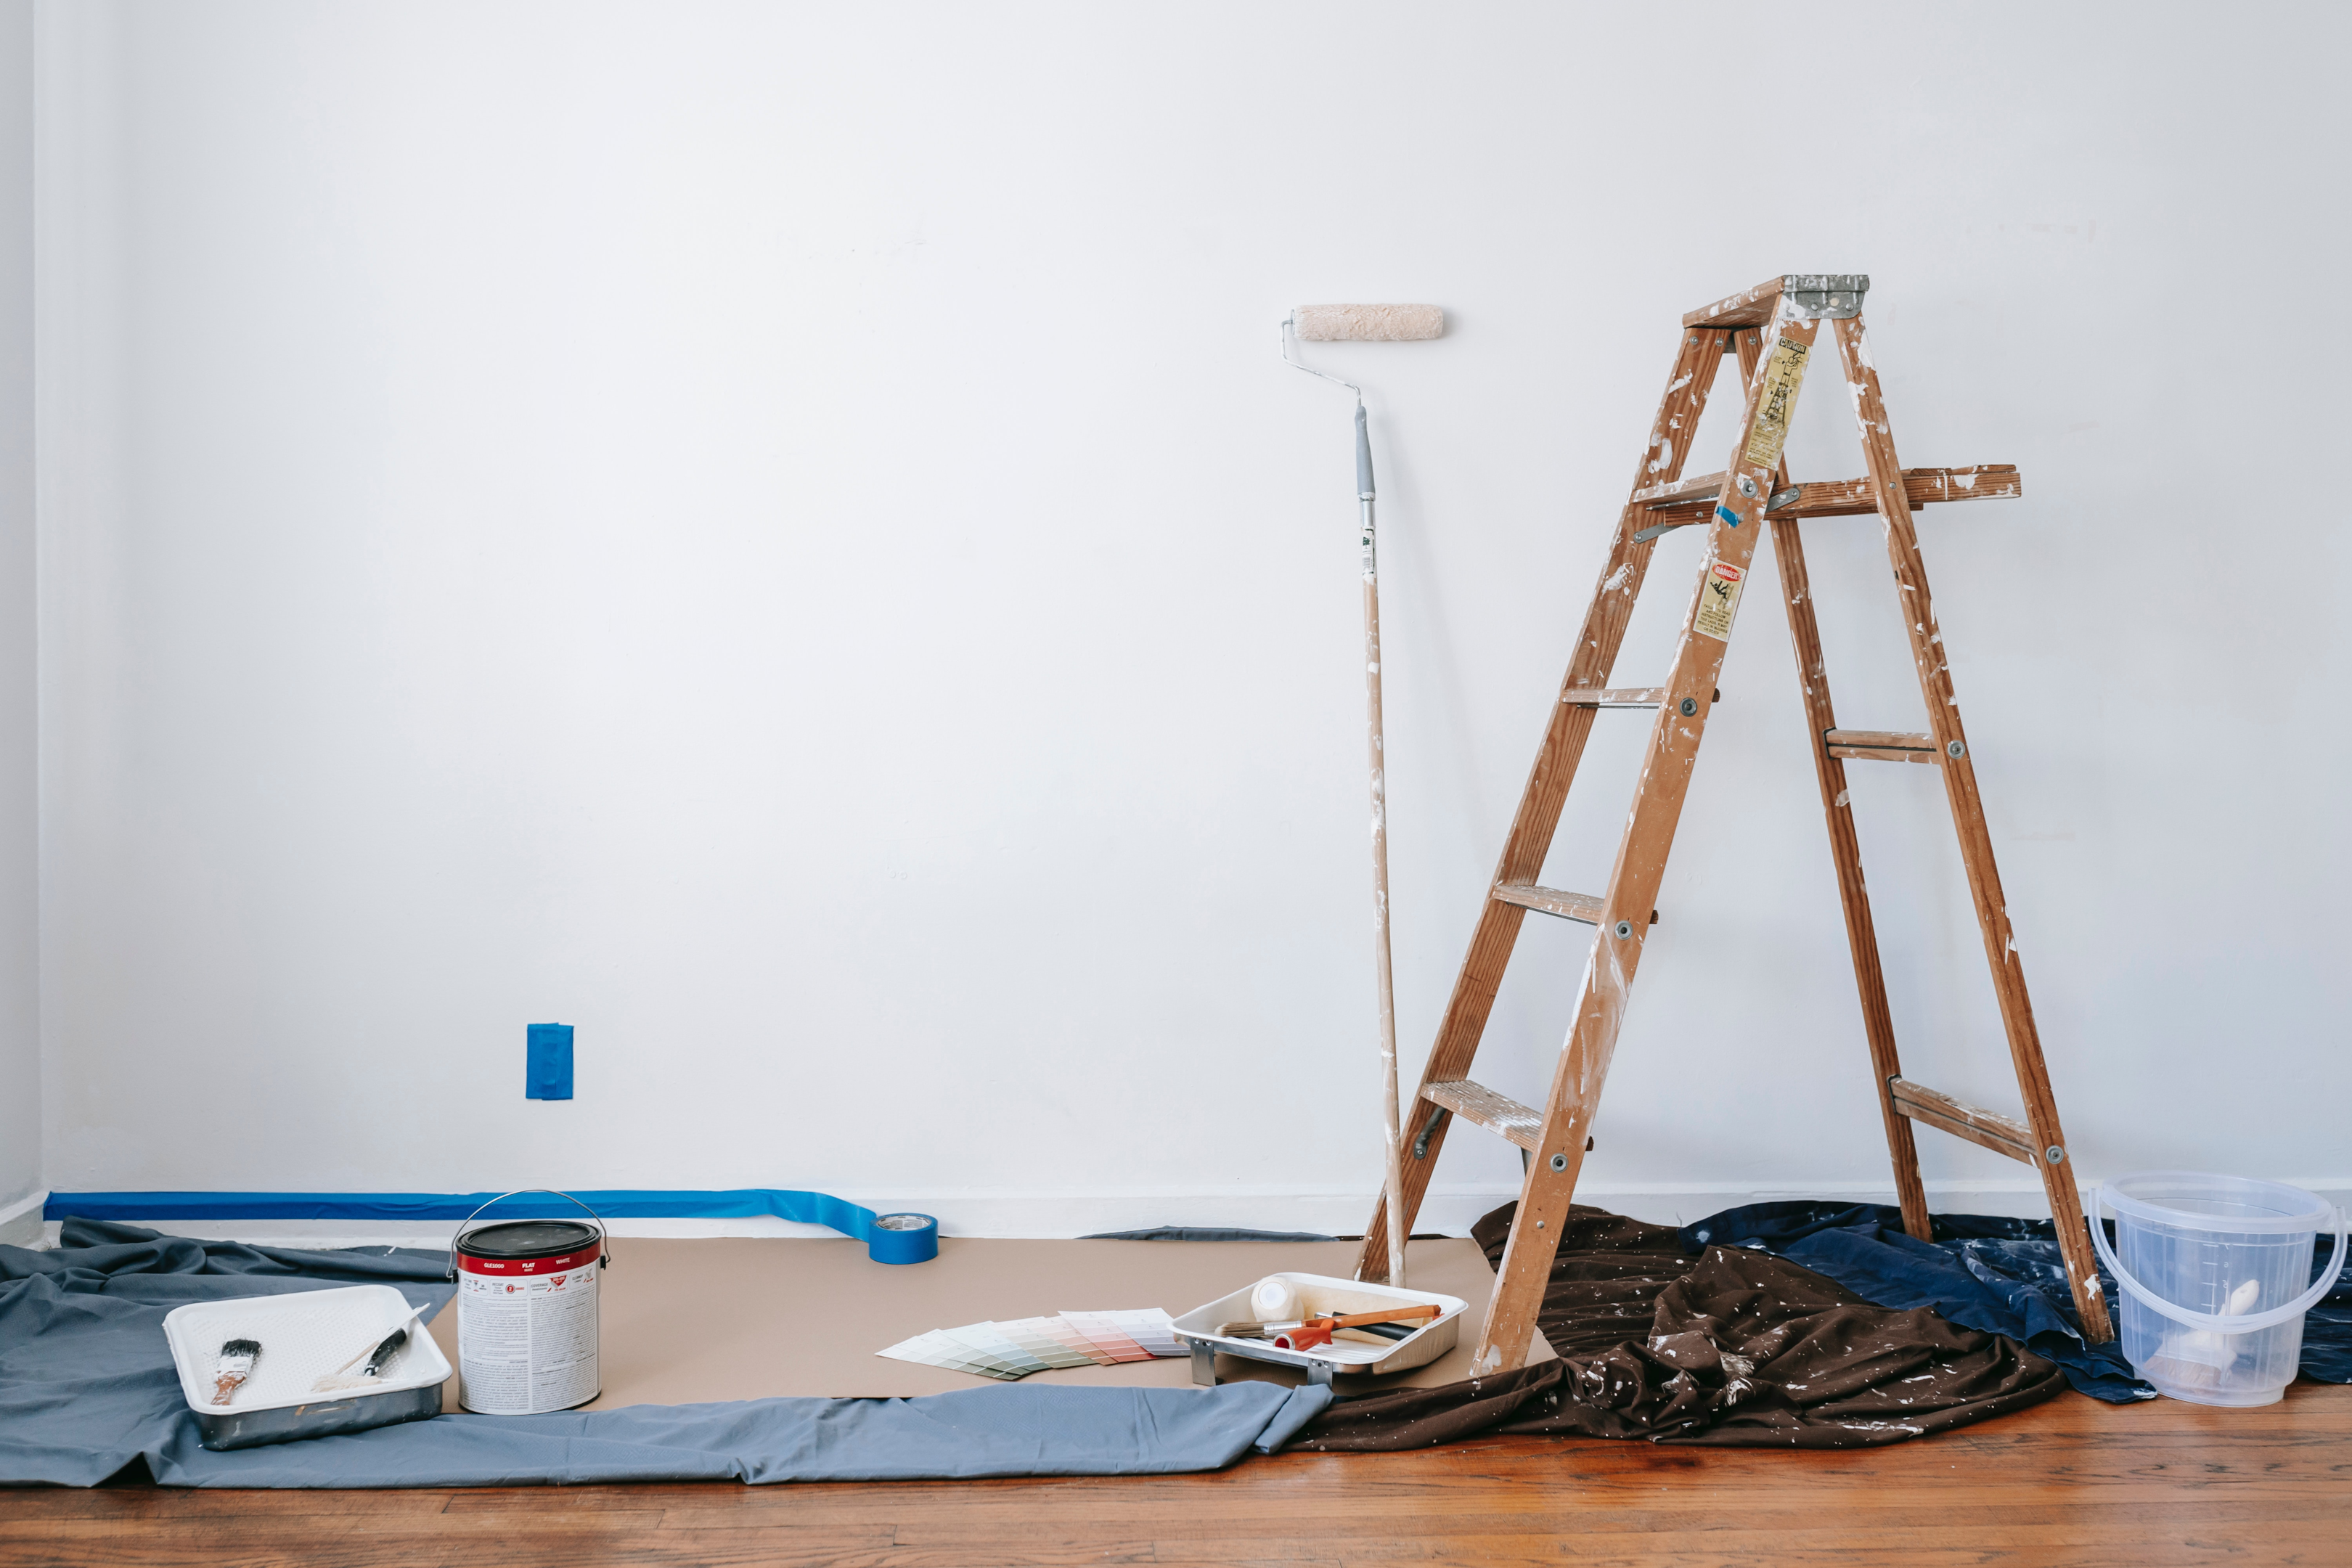 Selling your home to a new owner requires a lot of cleaning and fix-up work | Photo by Blue Bird from Pexels